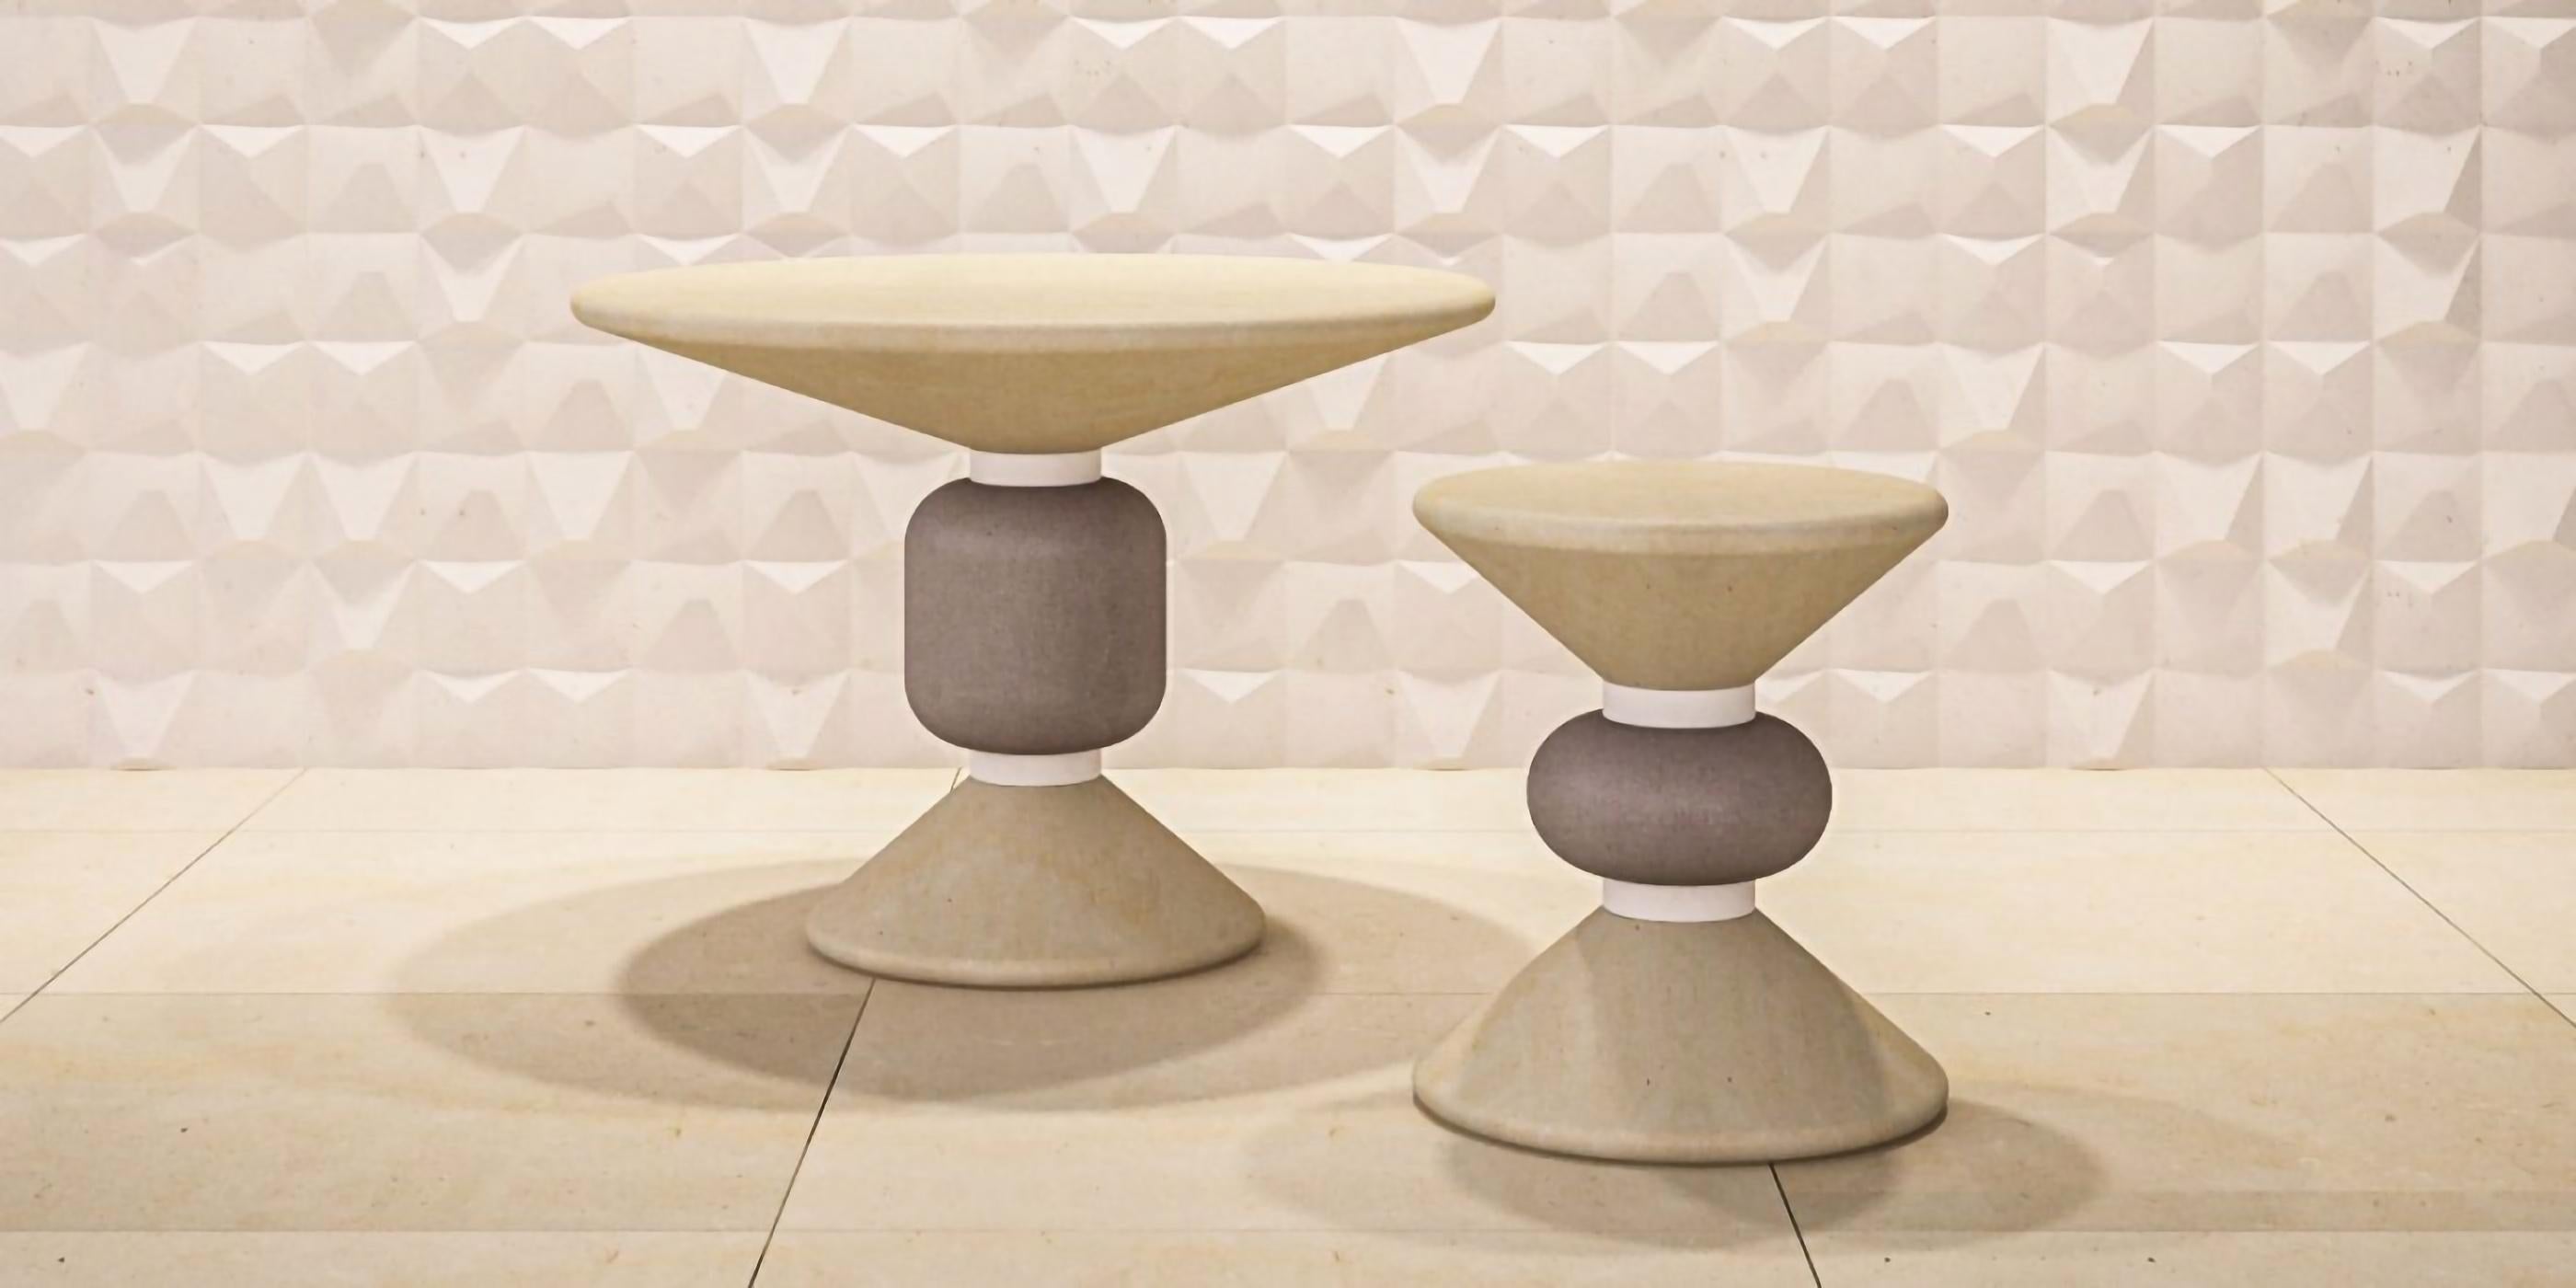 Designed by NOII studio, and crafted by PIMAR ITALY with italian limestone from own quarries in Salento (southern Italy) 
The local limestone named PIETRA LECCESE is unique on earth, warm coloring, natural touch and feel, solid and pure look. 
And